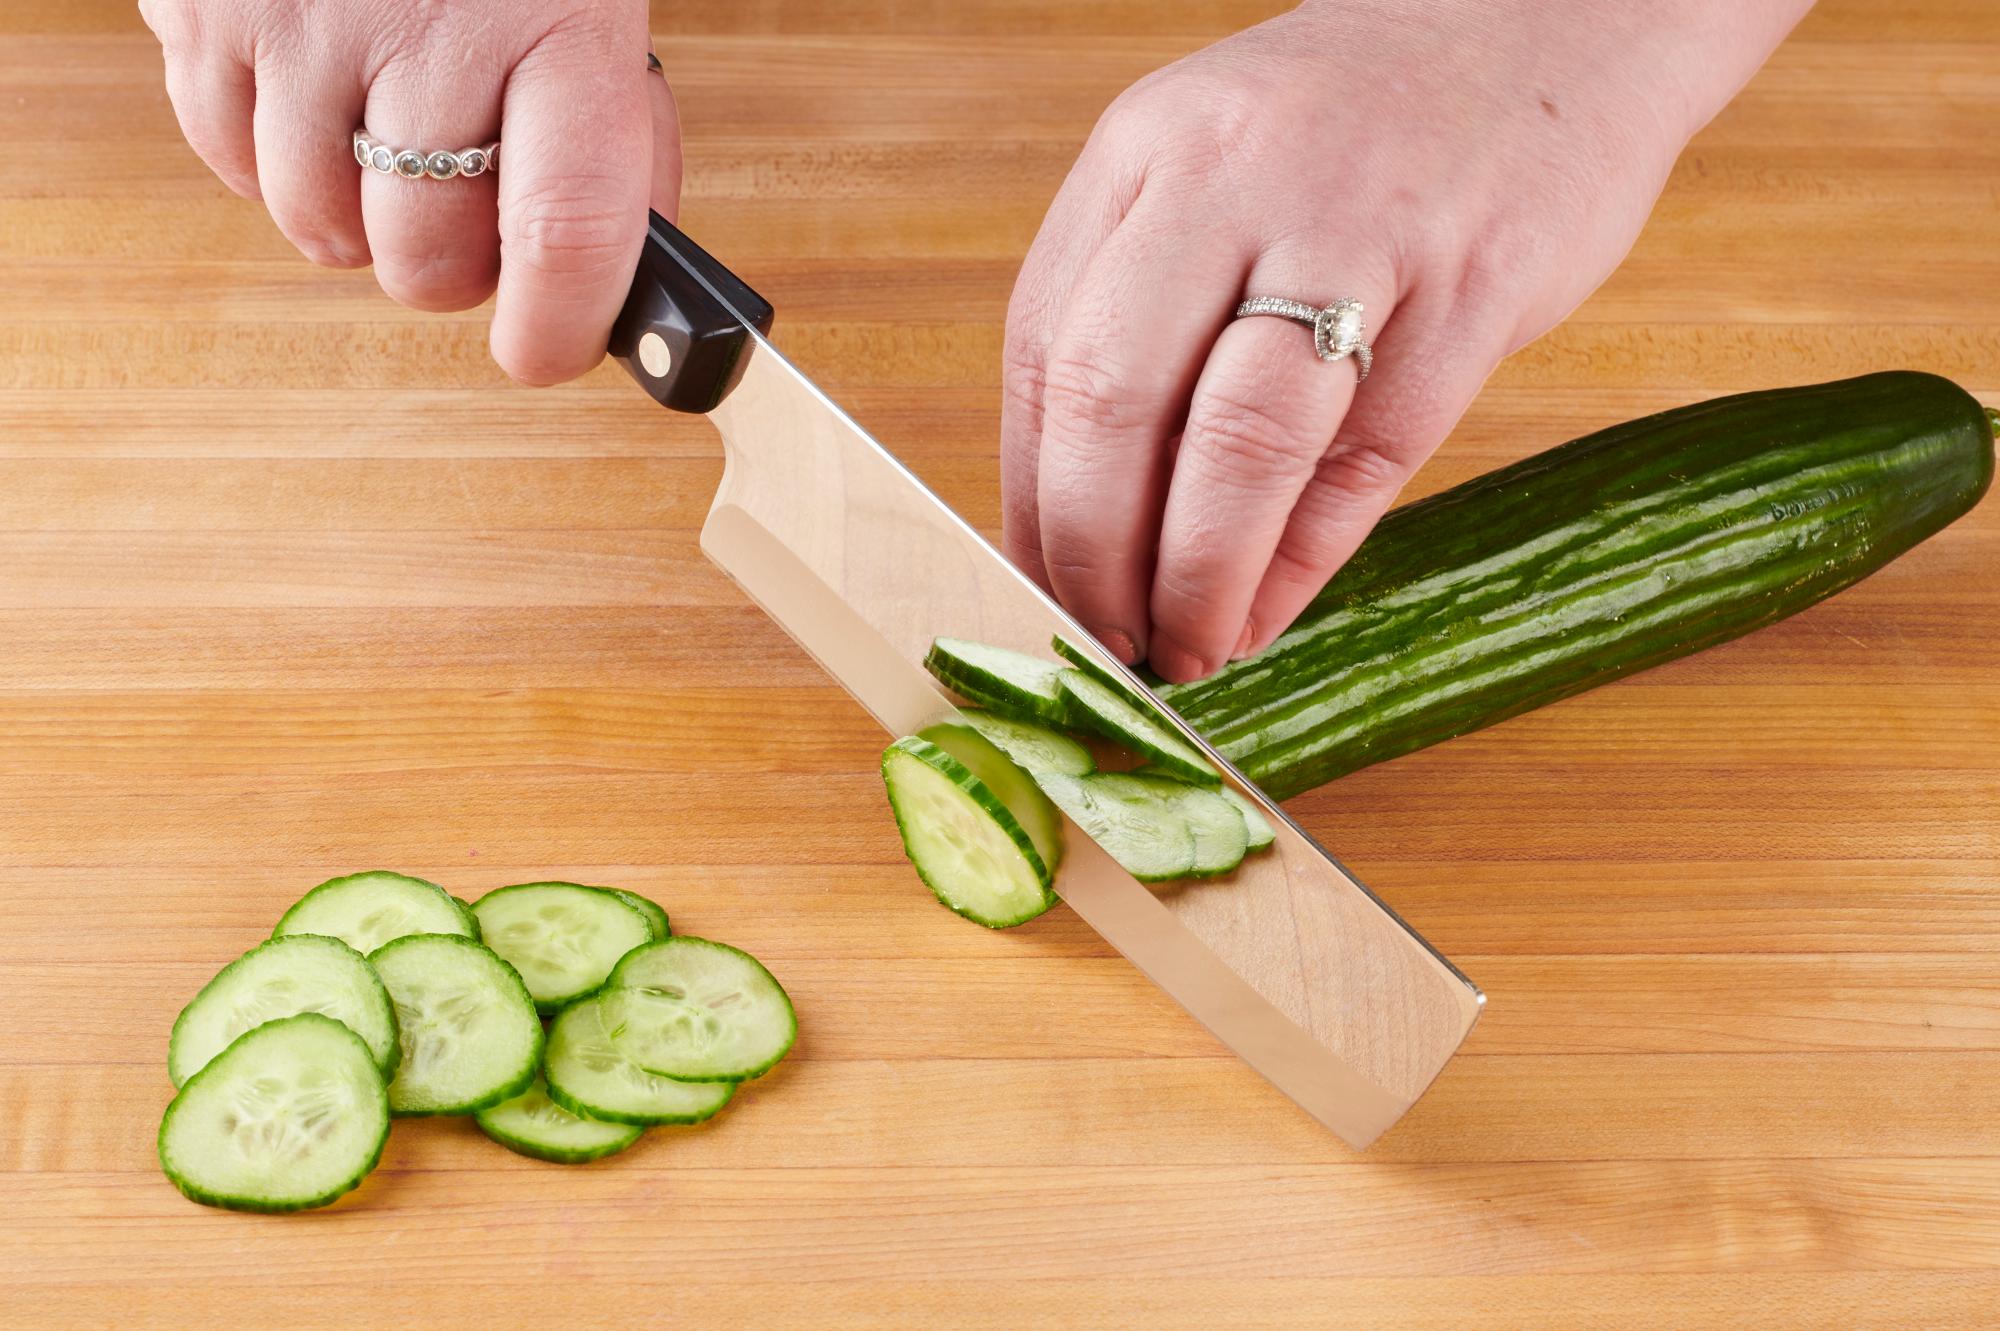 Slicing Cucumber with a 6 Inch Vegetable Knife.